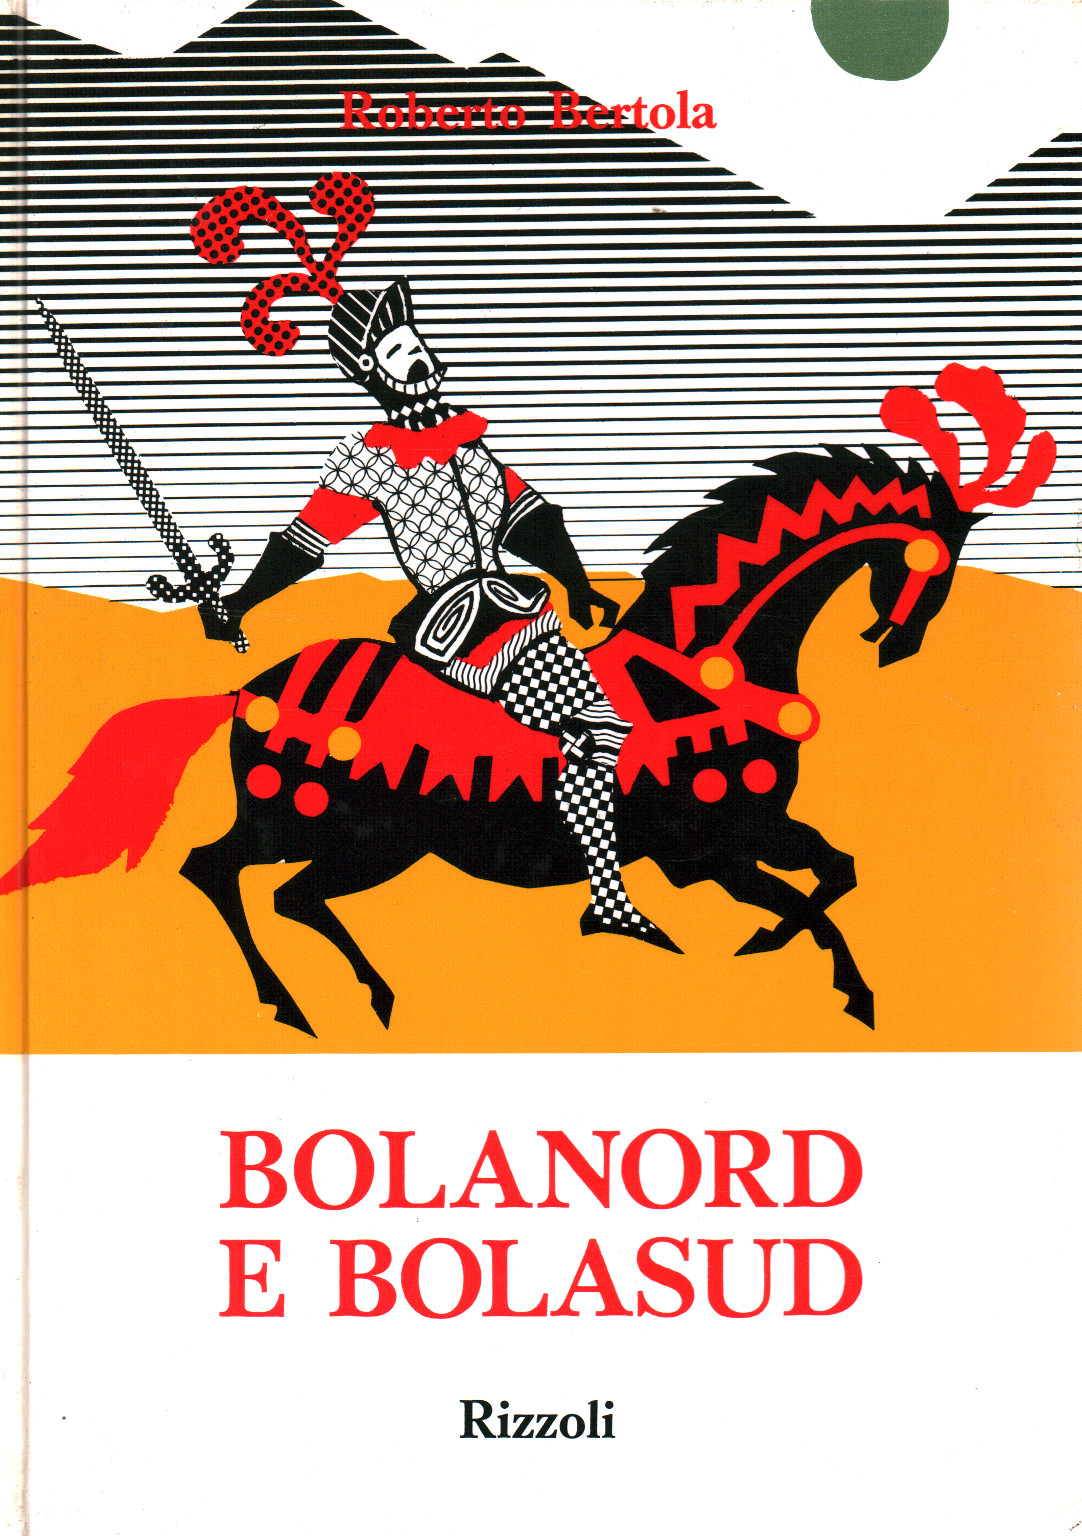 Bolanord and Bolasud, s.a.